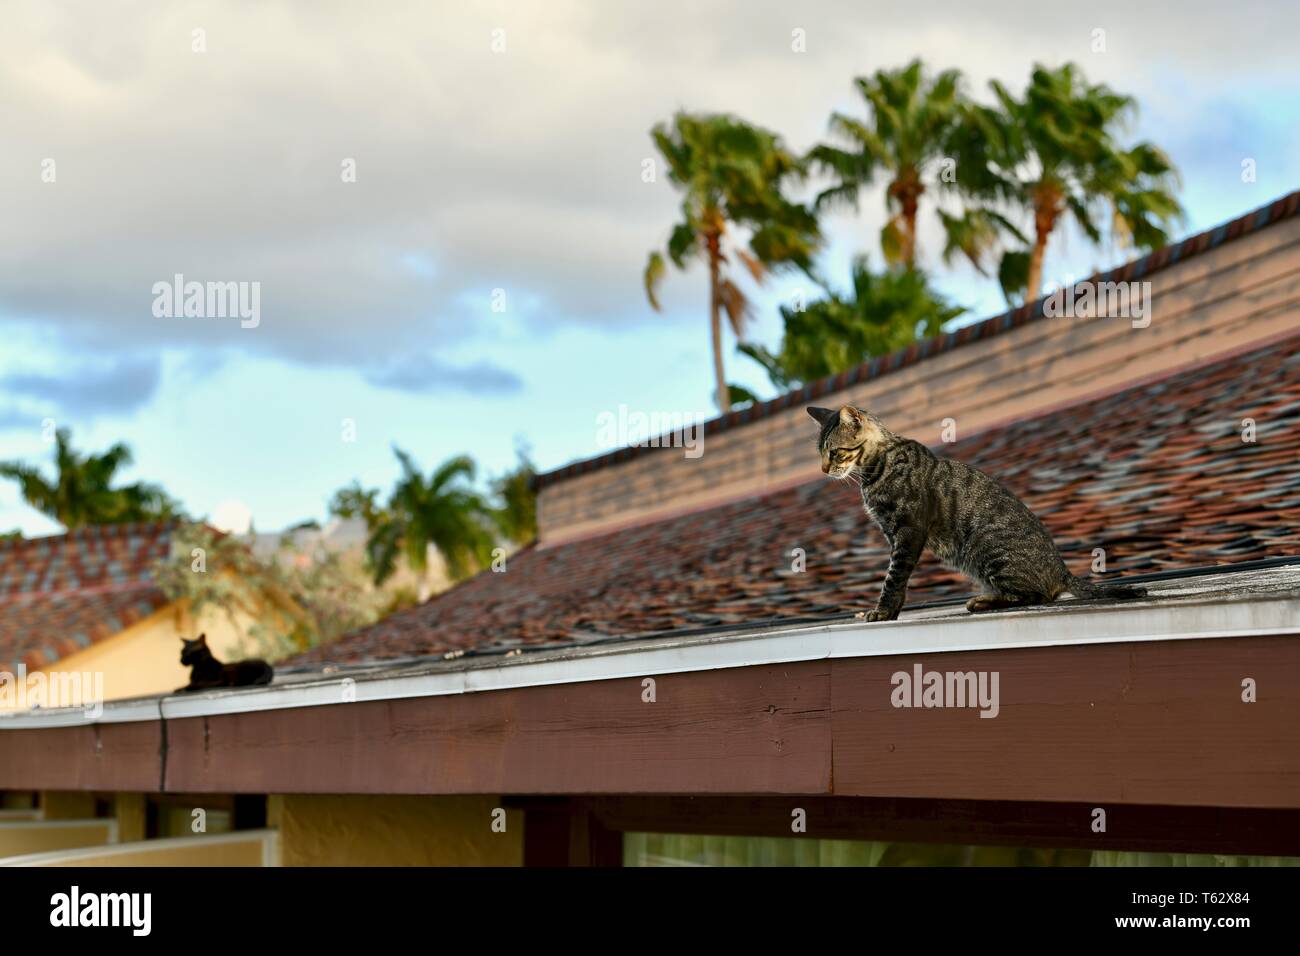 Feral cats sitting on the roof of the buccaneer hotel, St. Croix, United States Virgin Islands Stock Photo